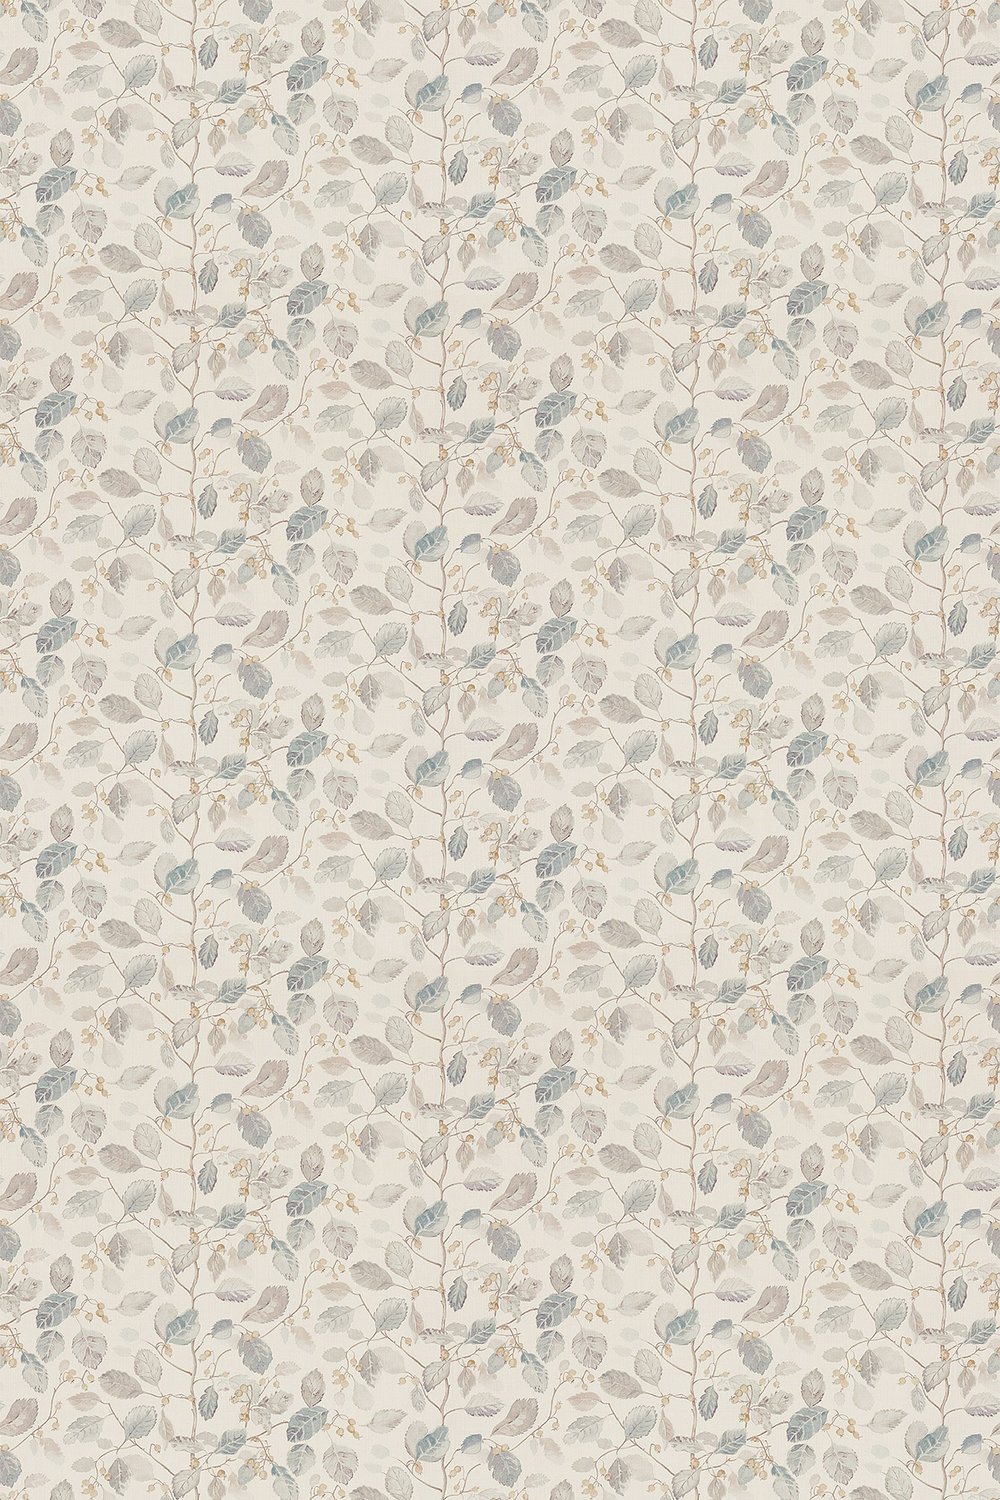 Woodland Berries Fabric - Grey / Silver - by Sanderson